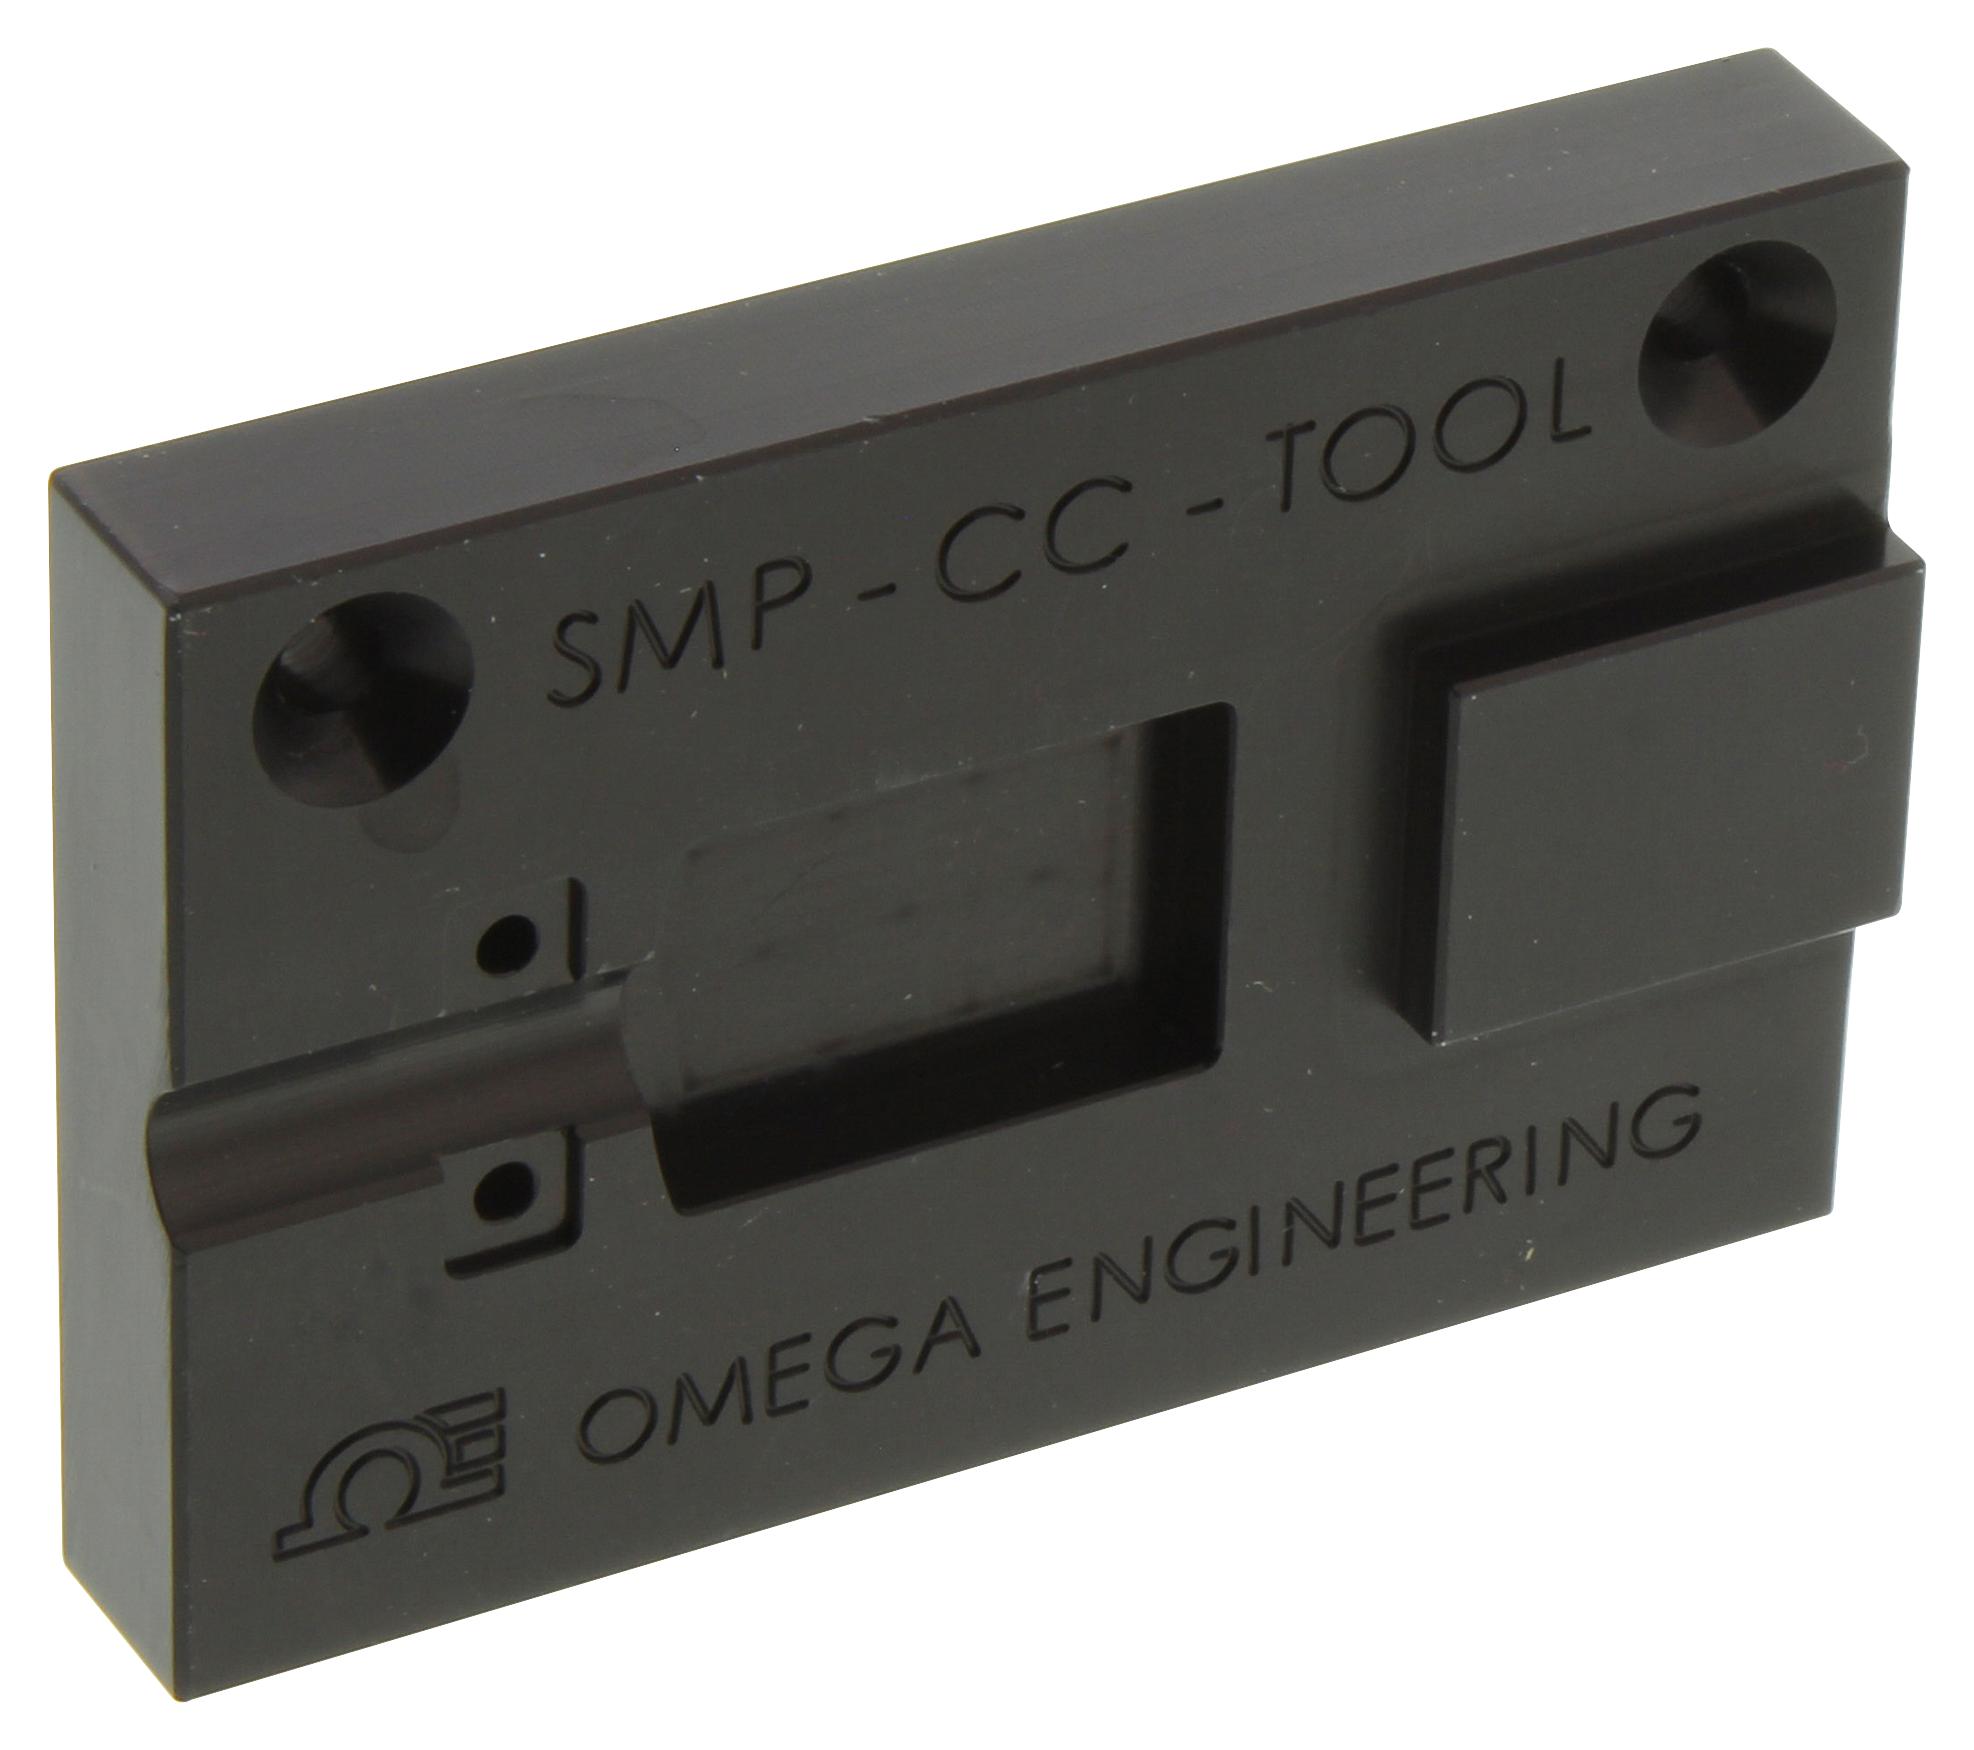 SMP-CC-TOOL FIXTURE/TOOL, CONNECTOR&CABLE CLAMP CAP OMEGA